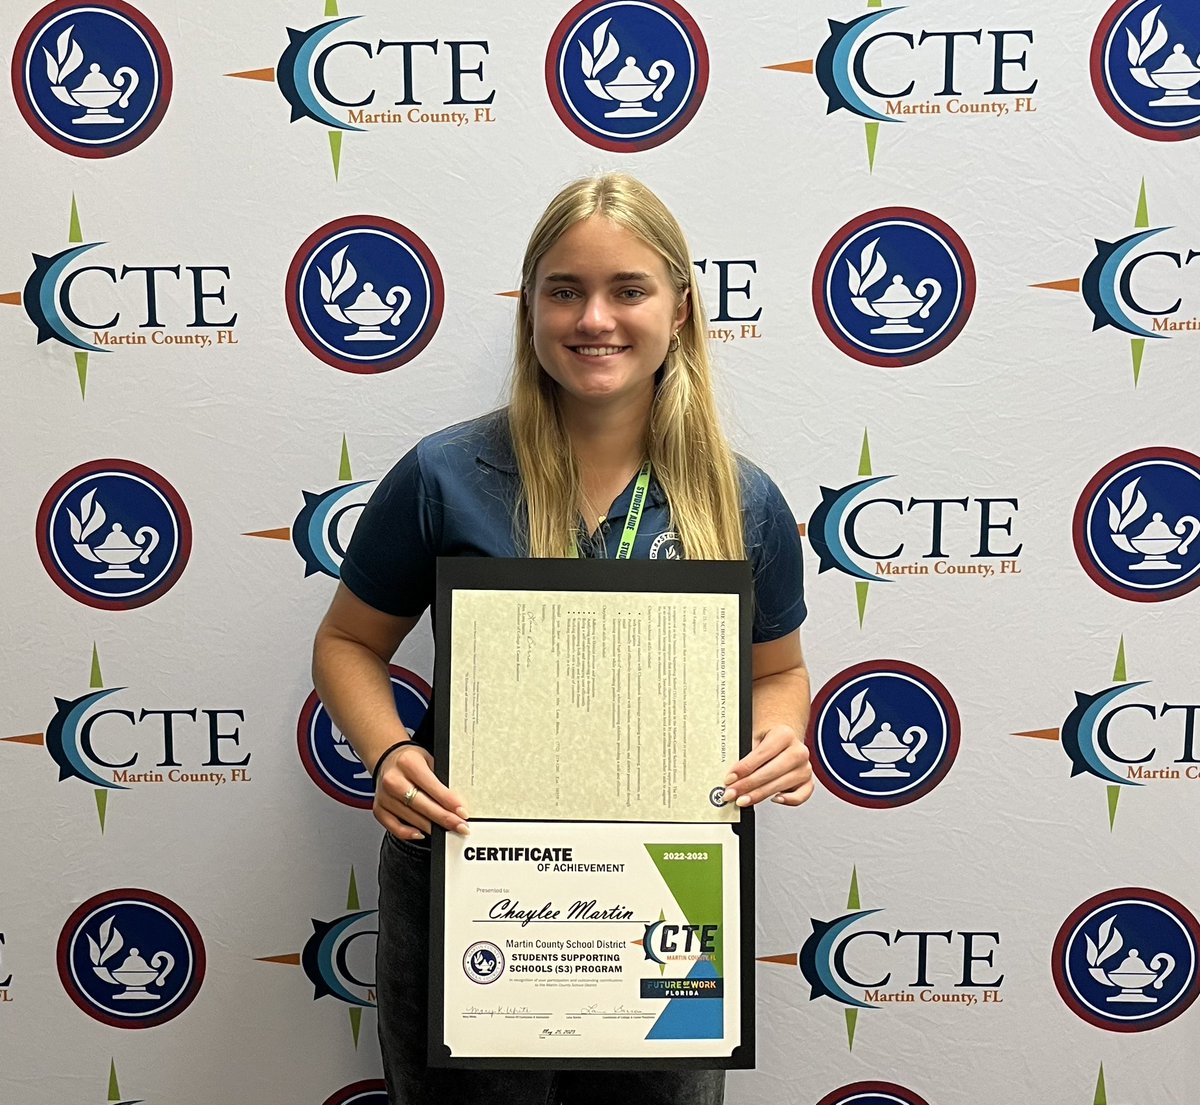 Students Supporting School (S-3) Alum Chaylee Martin will be heading to Clemson to study Biology. Thank you for your service, Chaylee. @MCSDFlorida @CareersMcsd